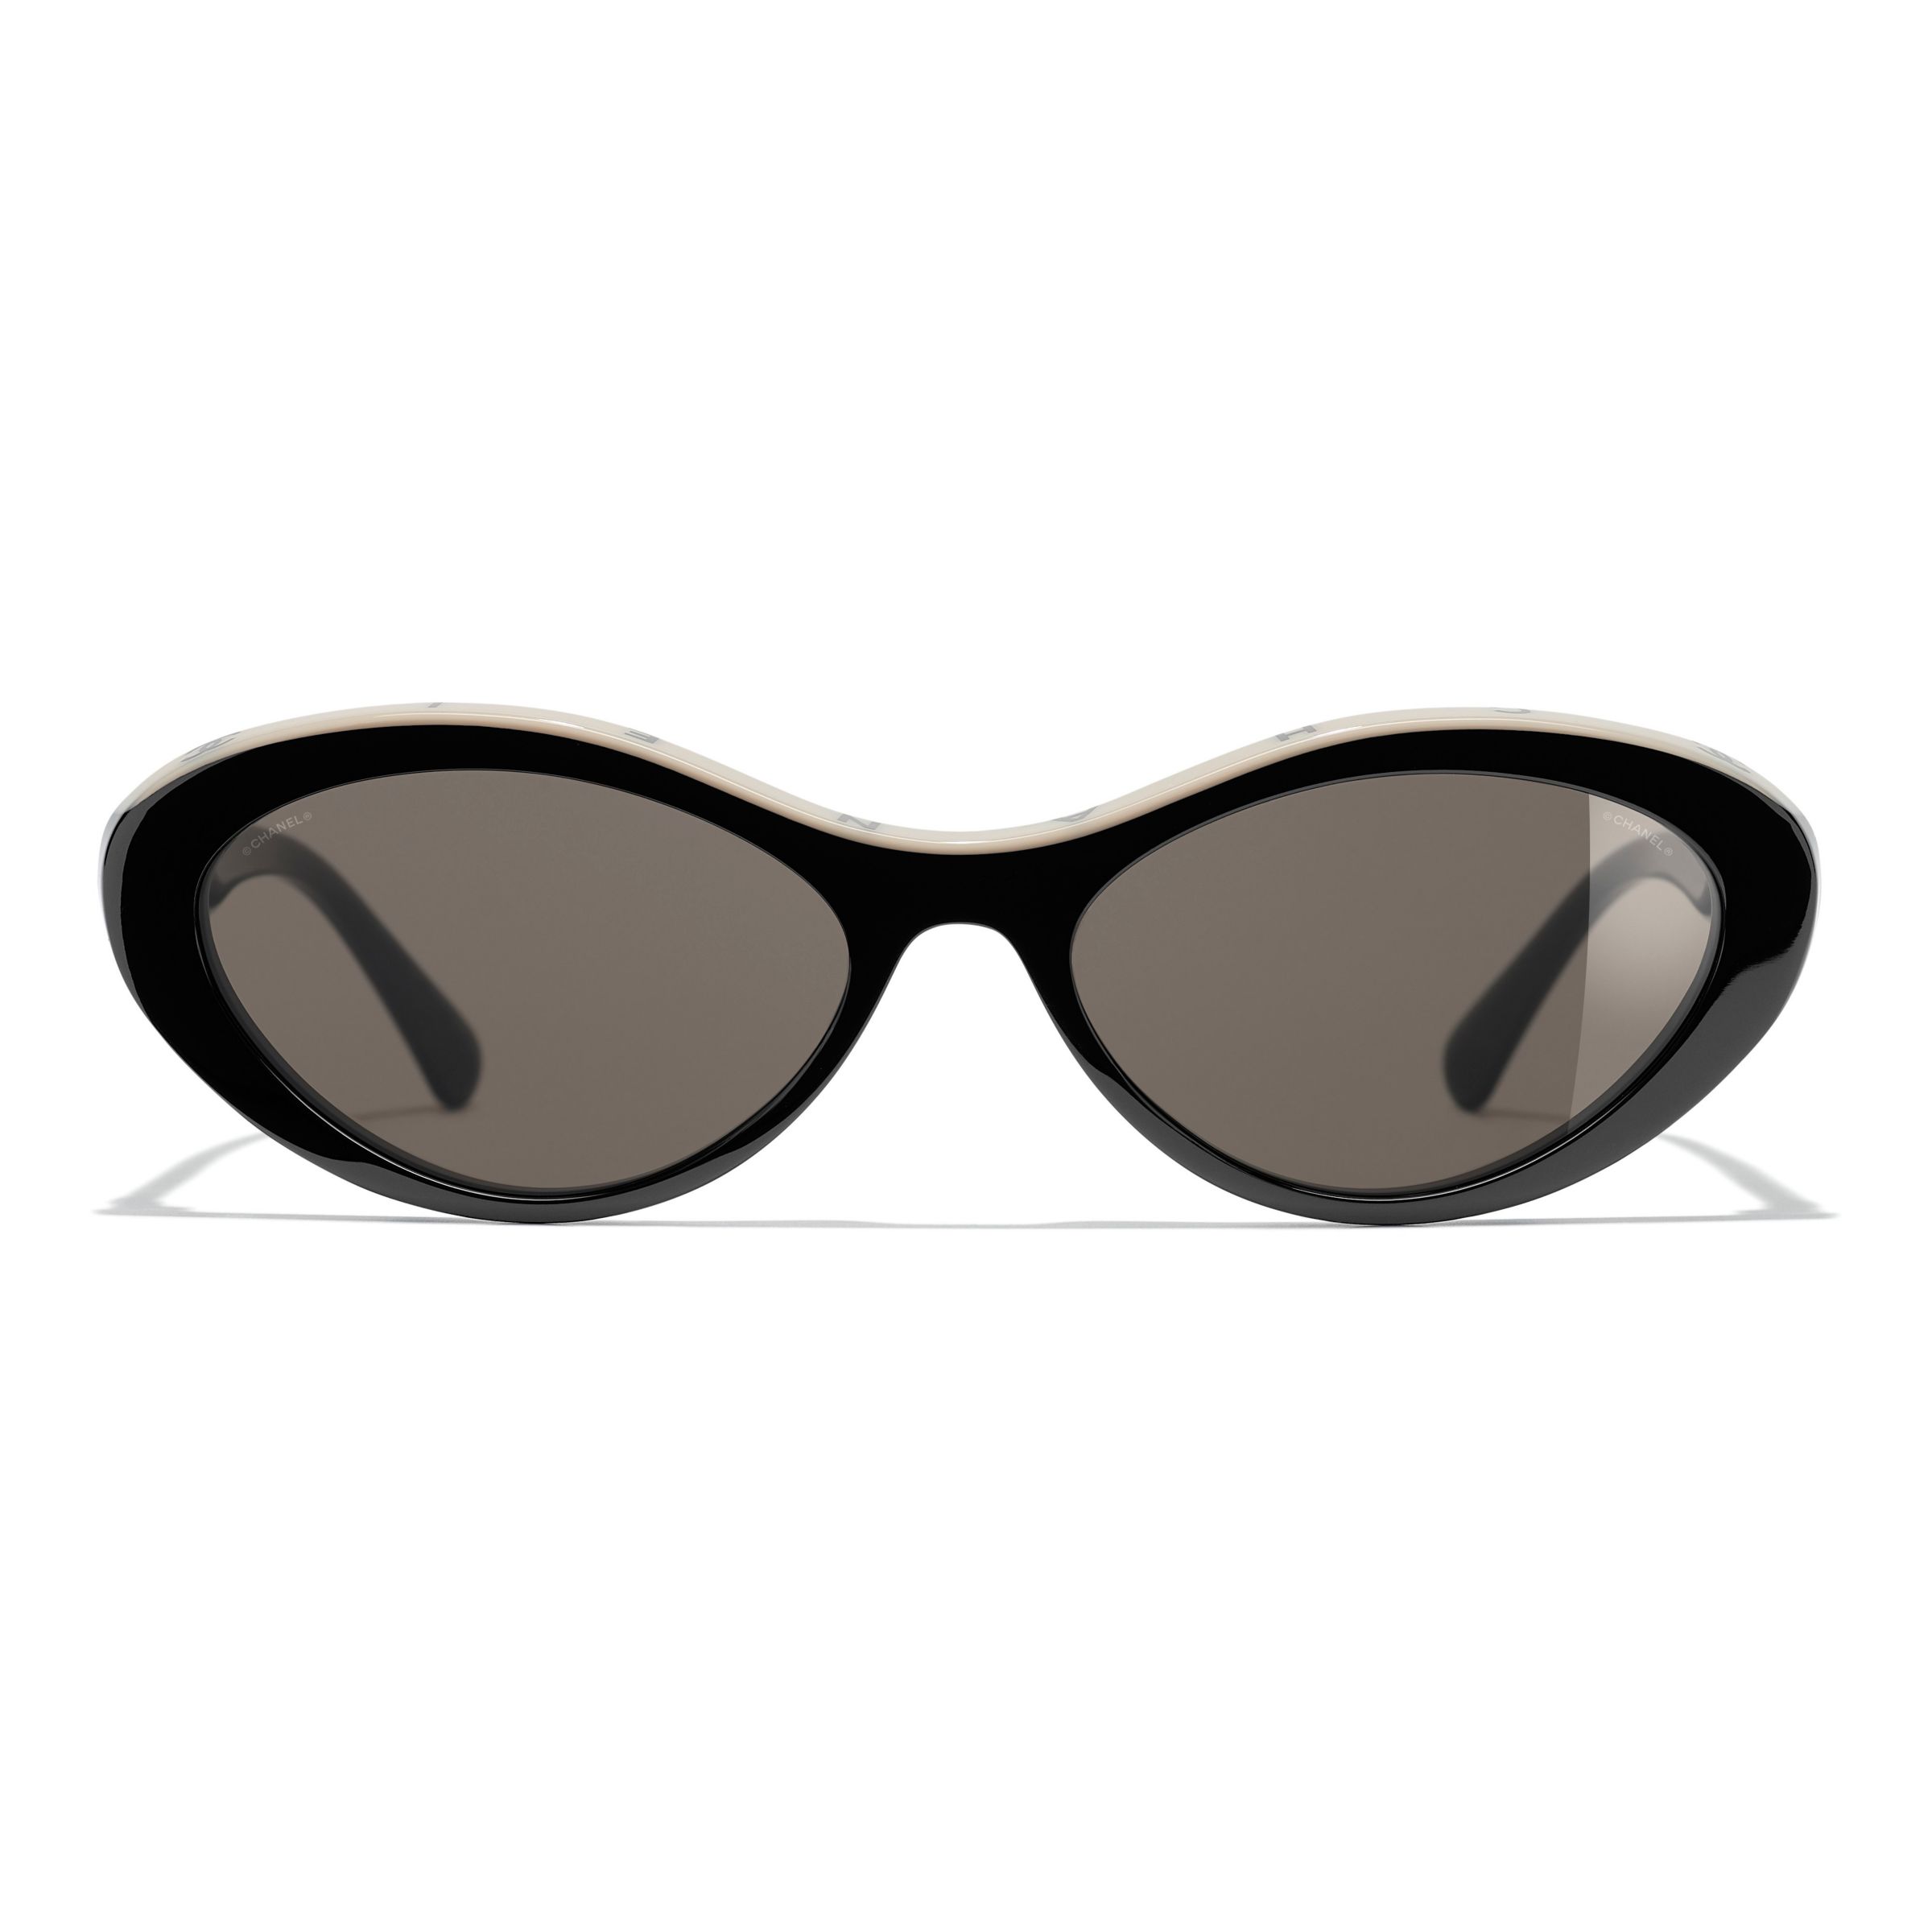 CHANEL Oval Sunglasses CH5416 Black/Beige at John Lewis & Partners